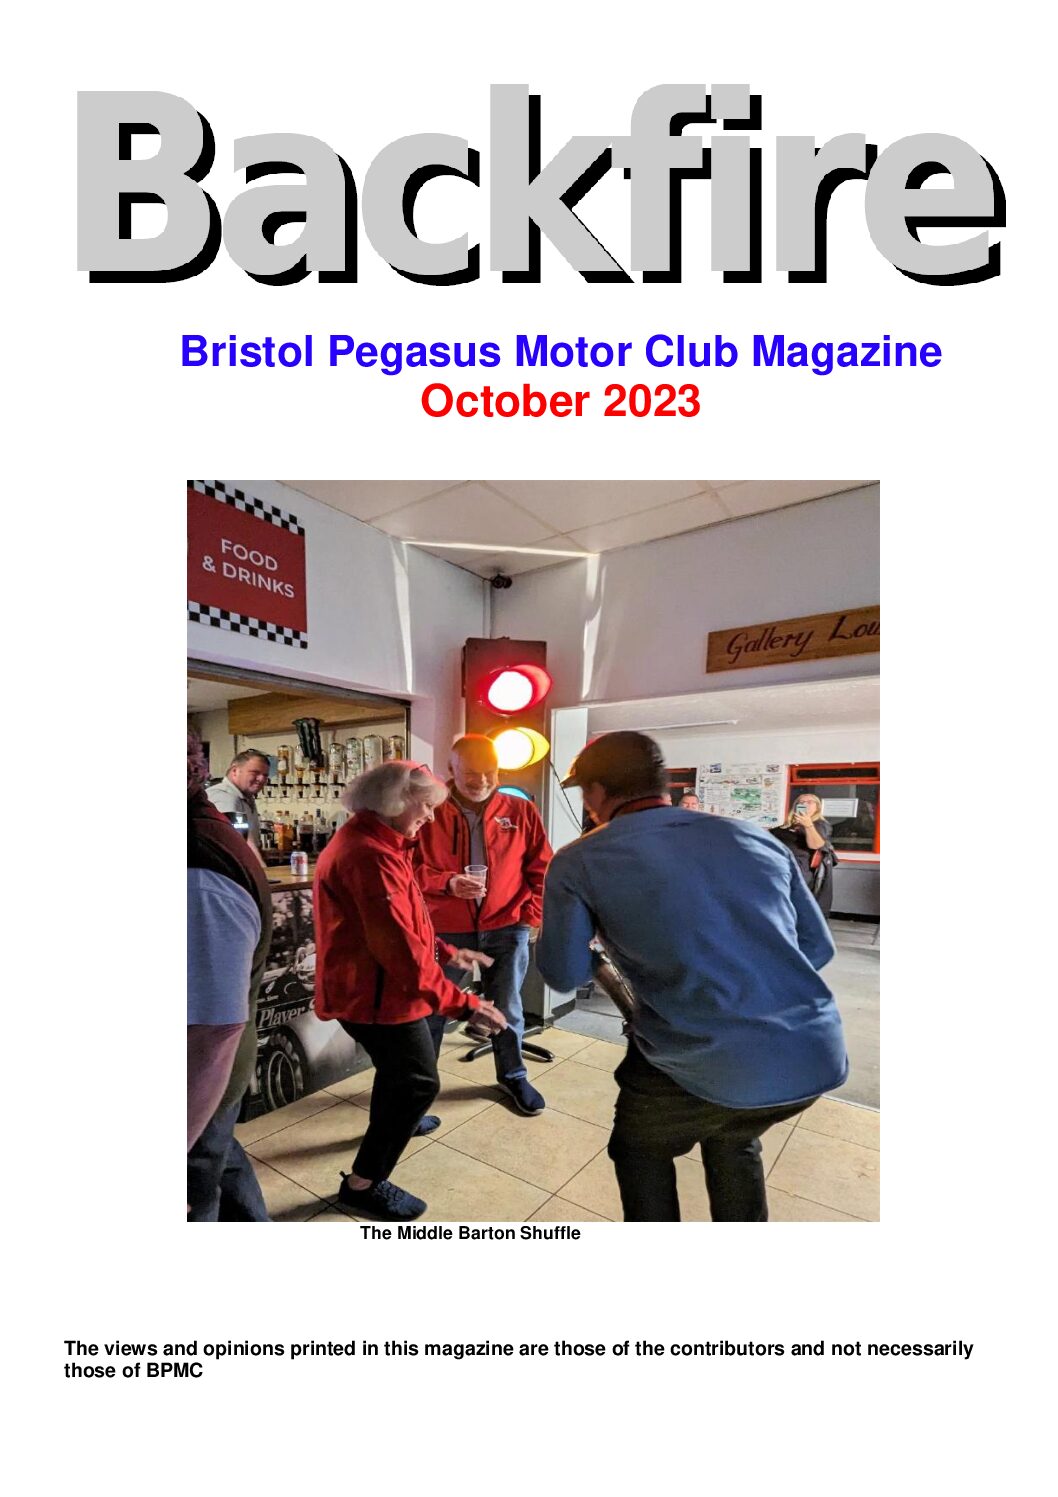 Front cover of October 2023 Issue